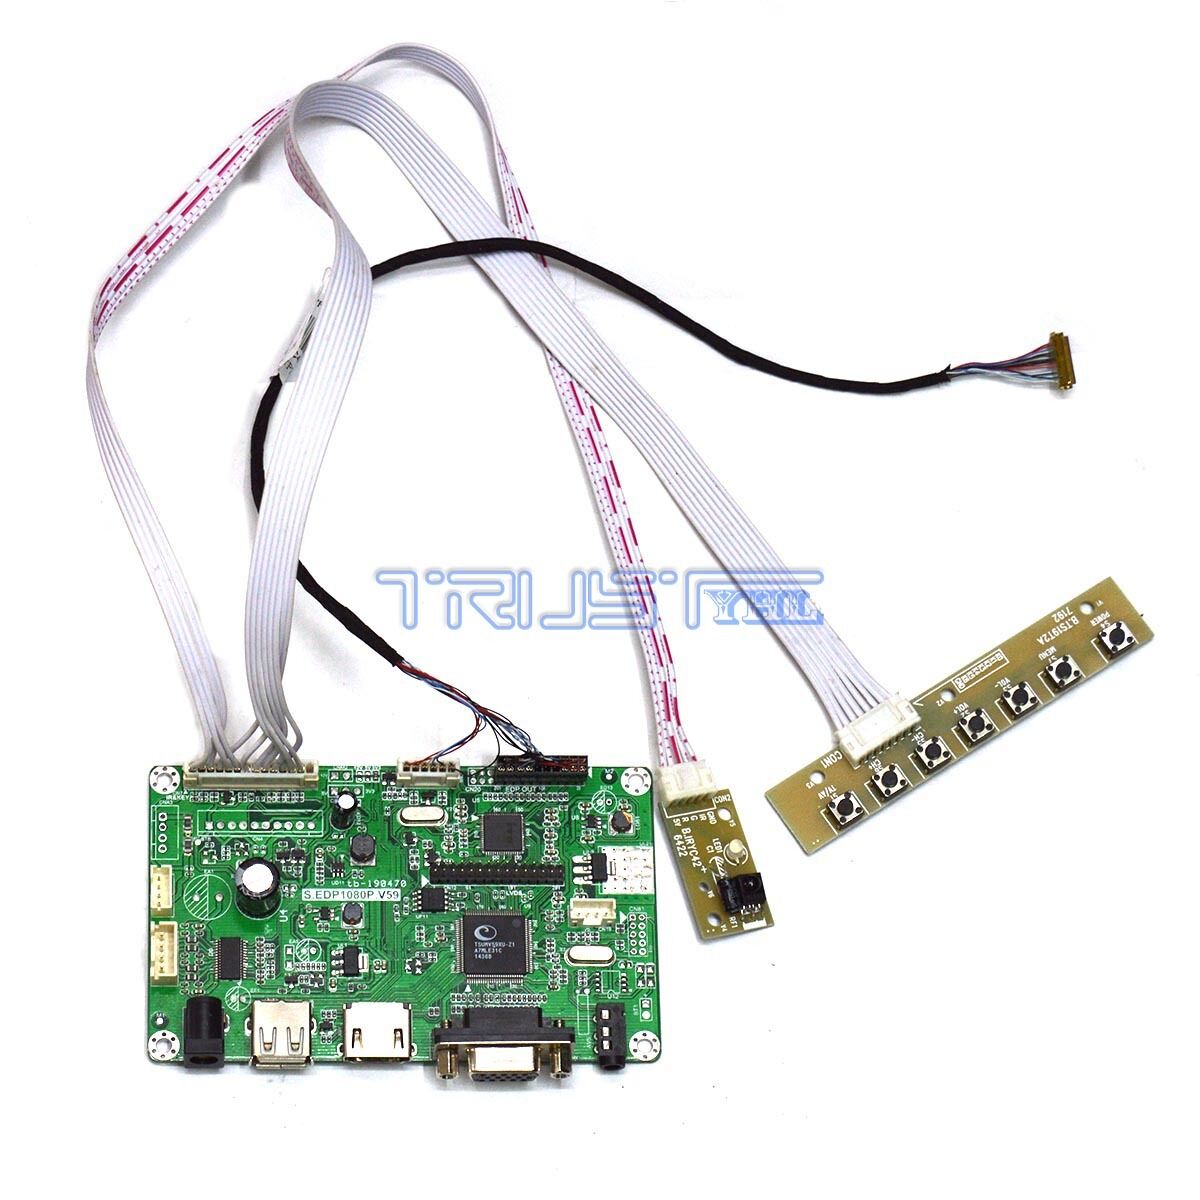 Embedded DisplayPort LCD Driver Controller Board Cable Kit For HDMI to eDP Panel